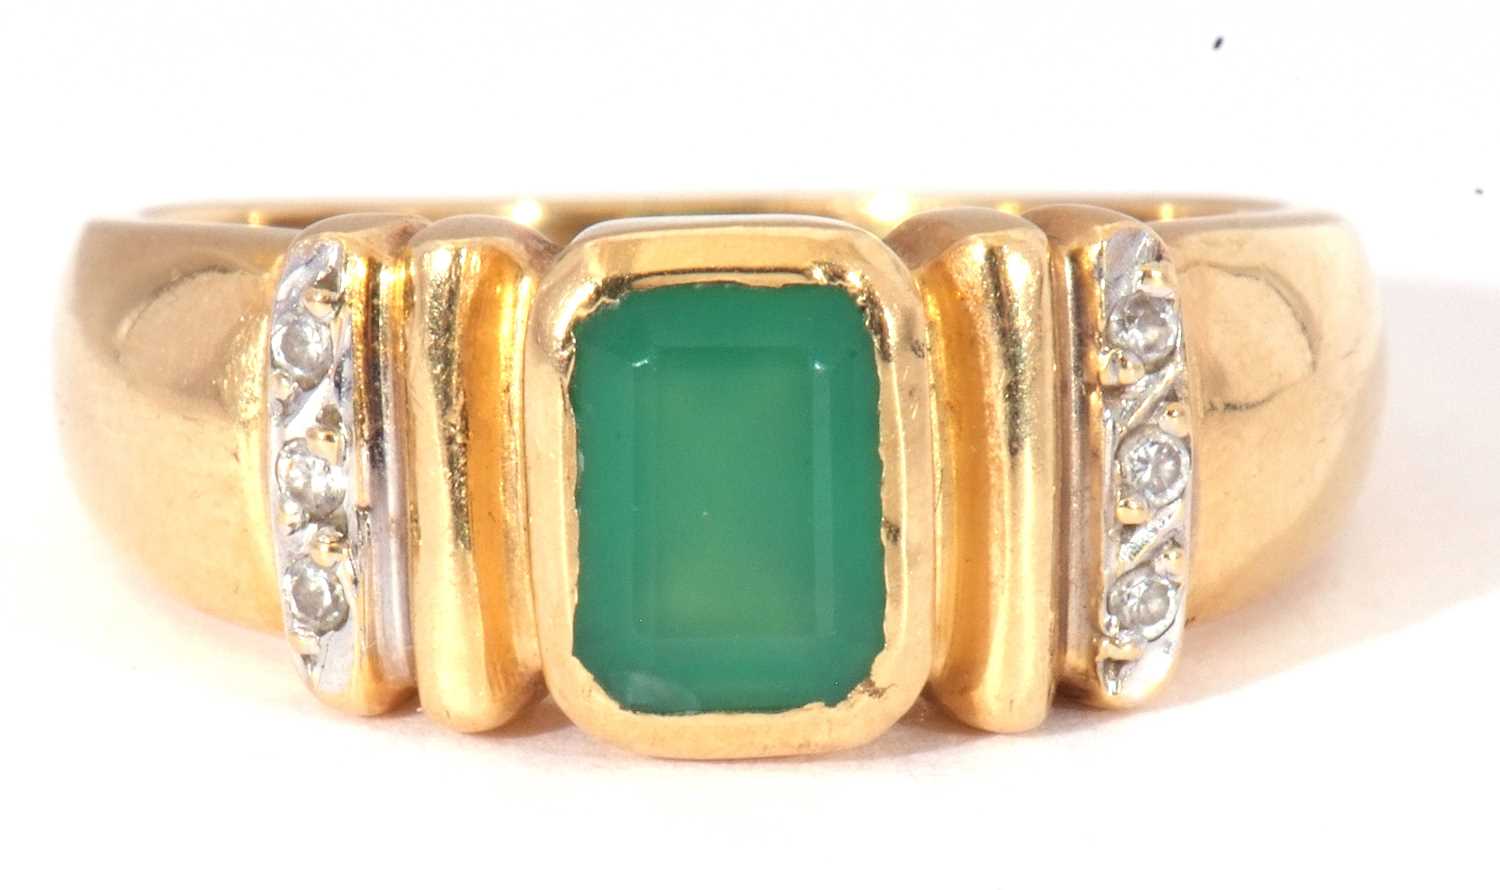 Modern green and white stone set ring featuring a central rectangular cut green stone in rub-over